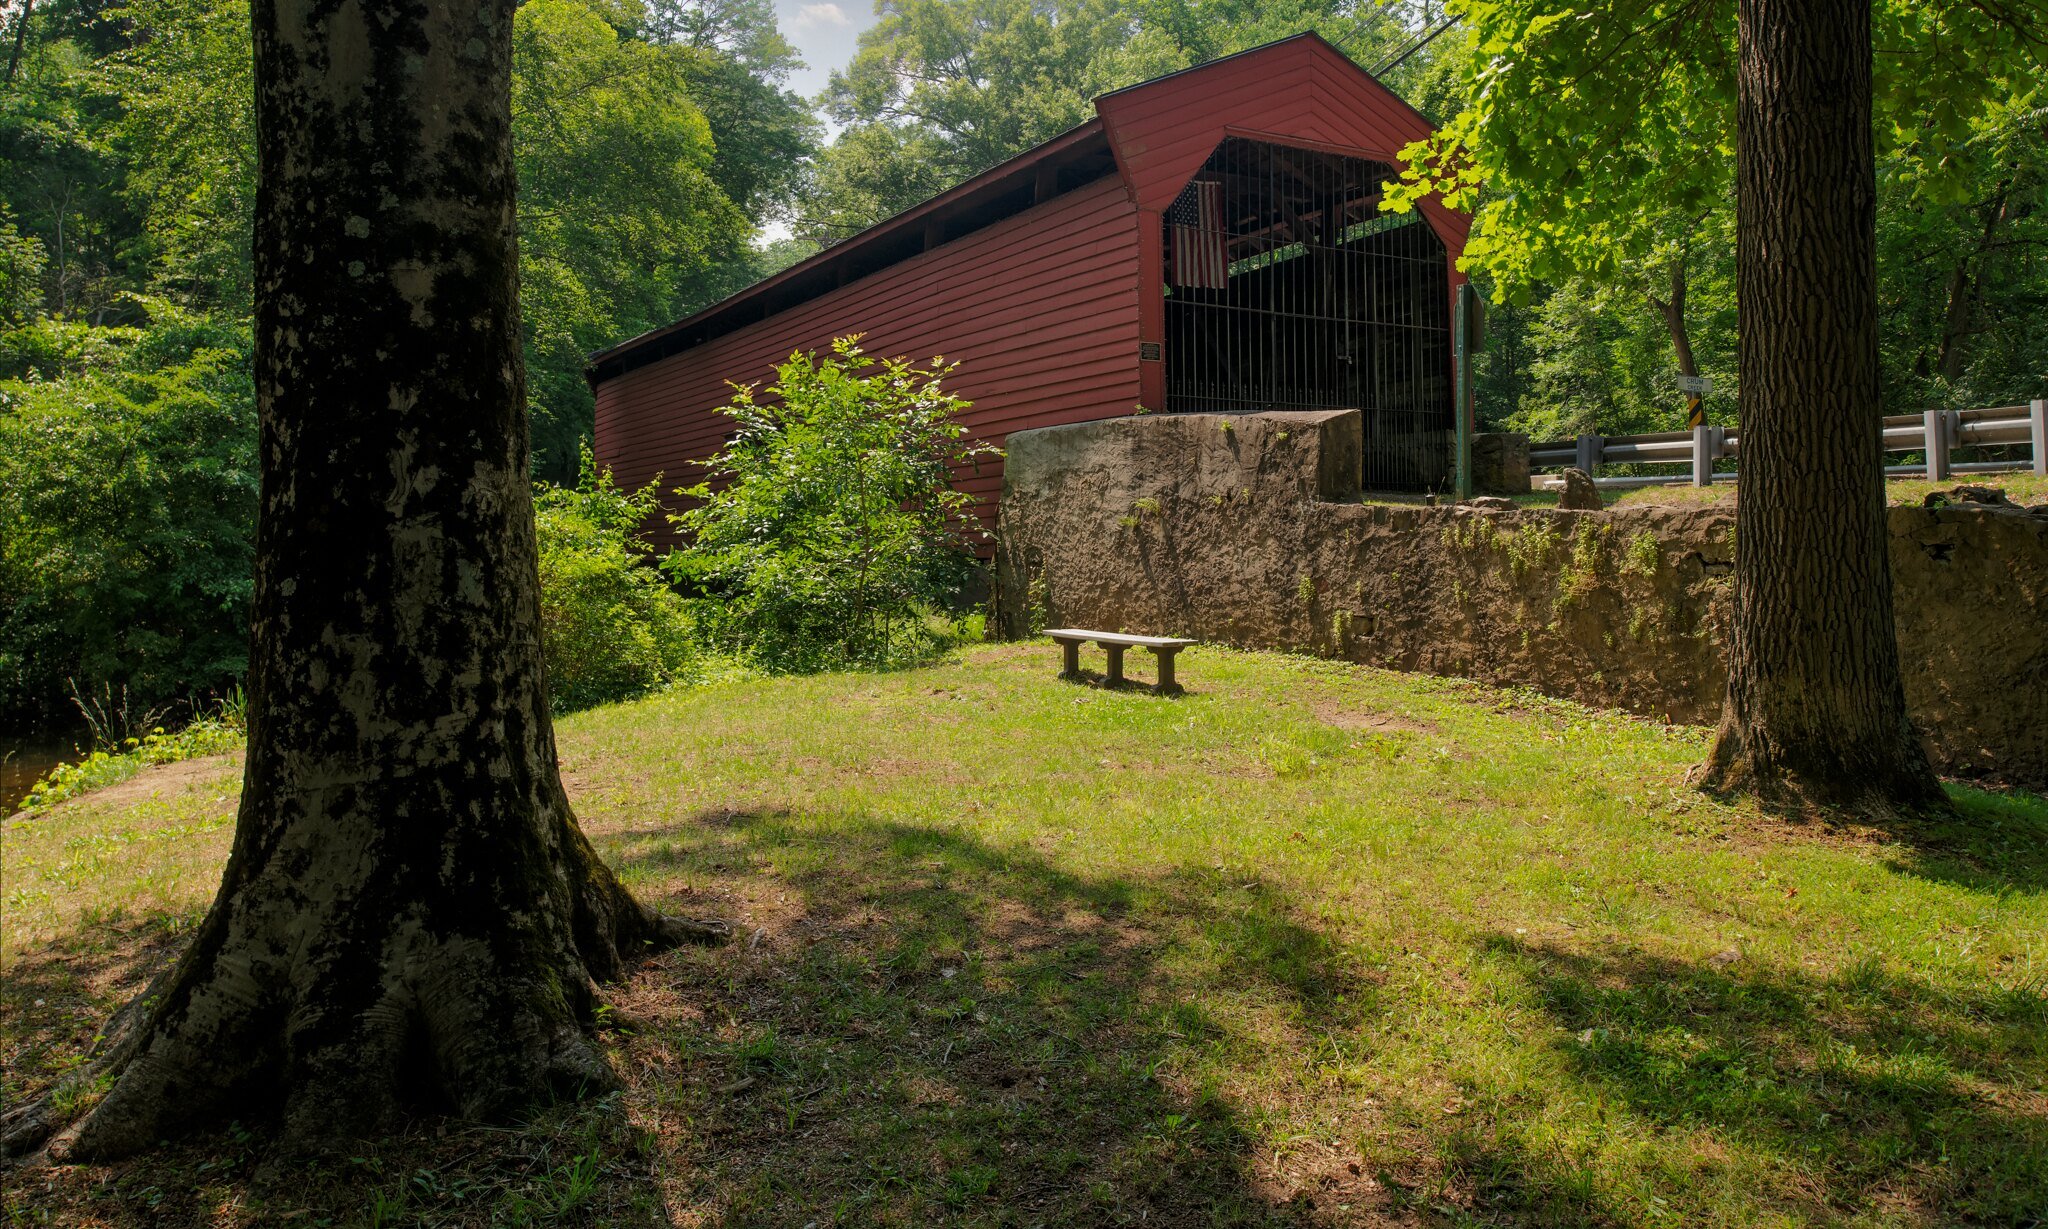  Bartram's Covered Bridge in Newtown Square, Chester County, PA.  Built in 1860.   